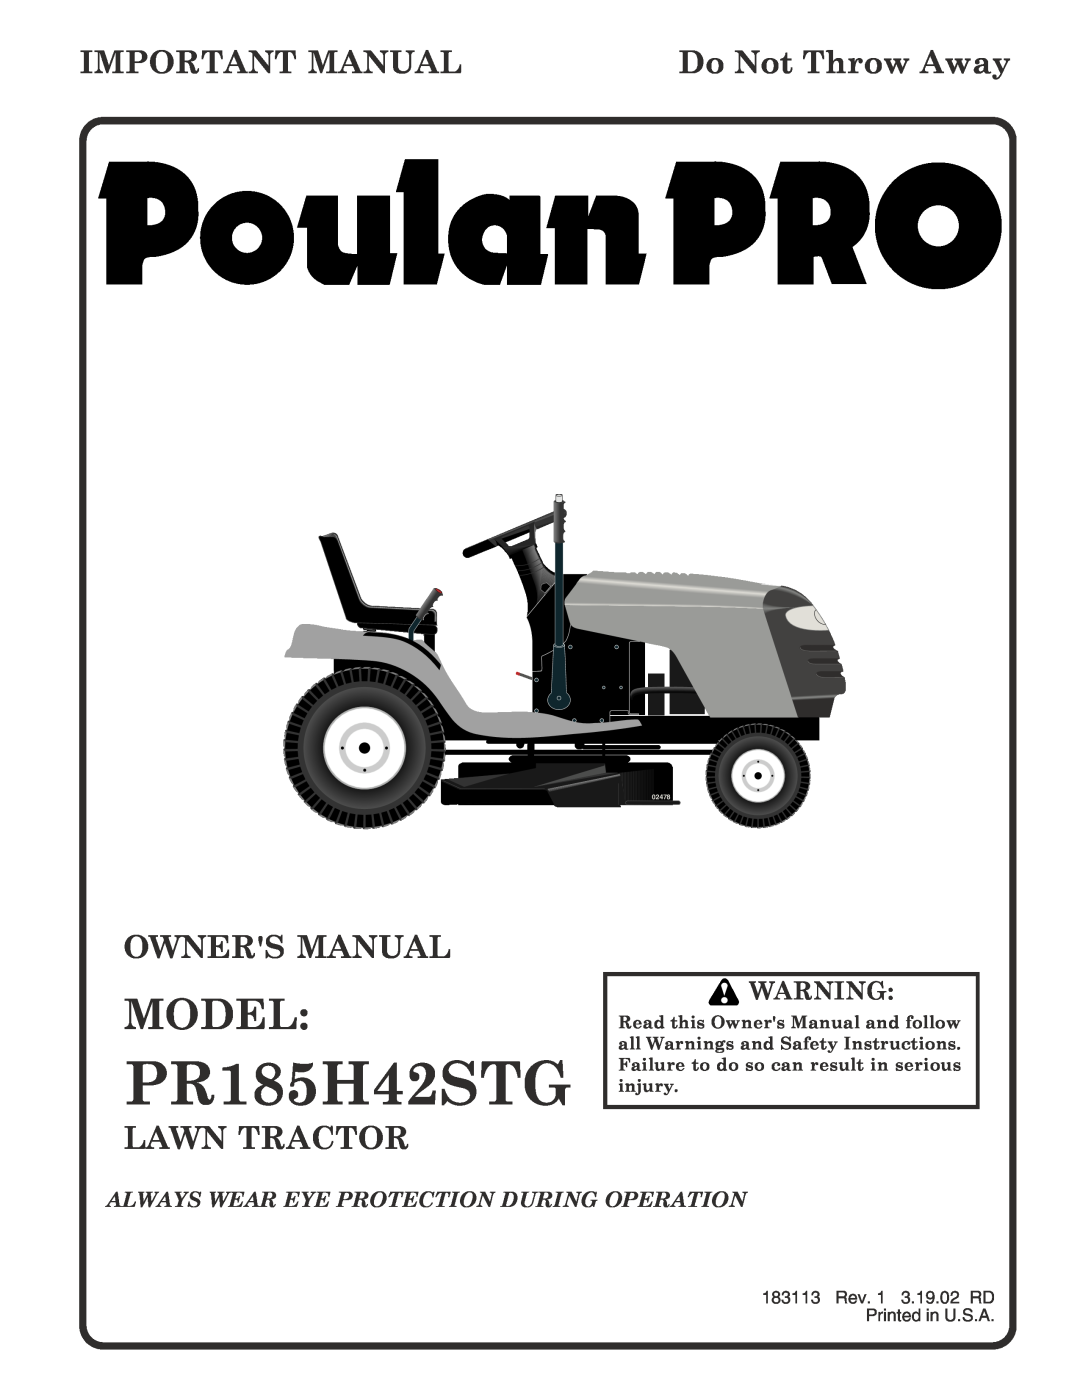 Poulan PR185H42STG owner manual Model, Important Manual, Do Not Throw Away, Owners Manual, Lawn Tractor, 02478 